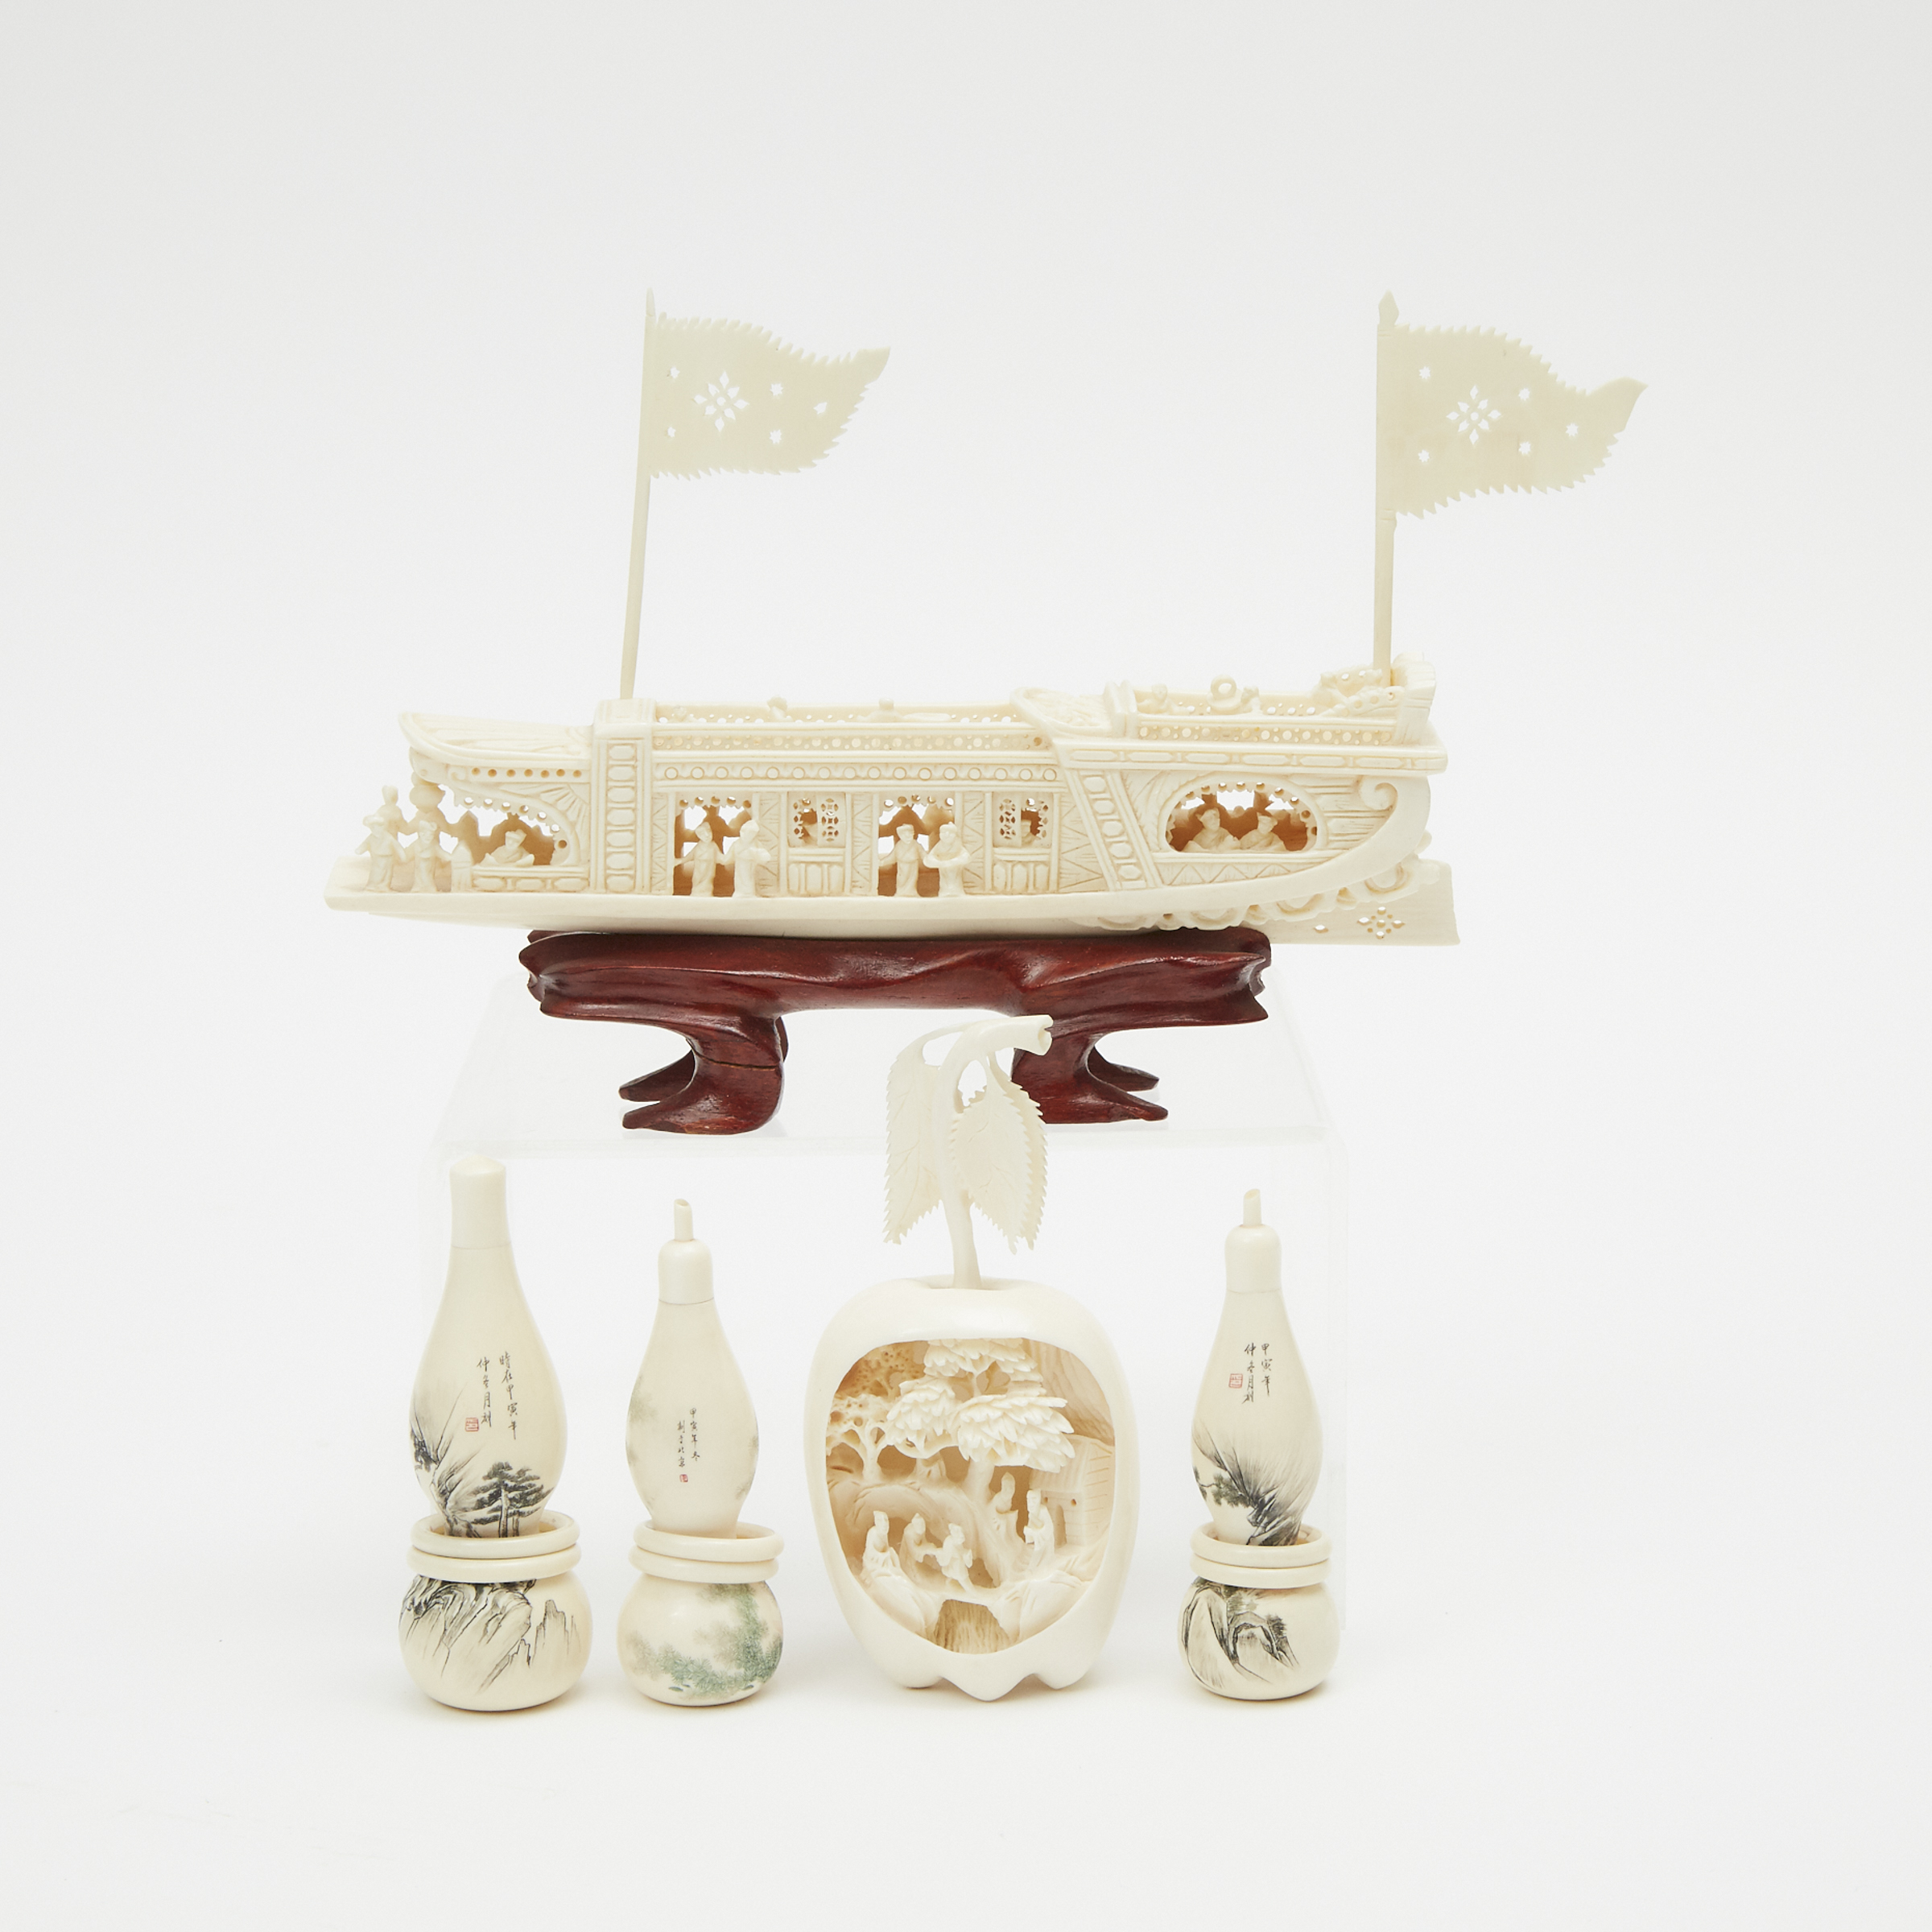 A Group of Five Ivory Carved Objects, Republican Period